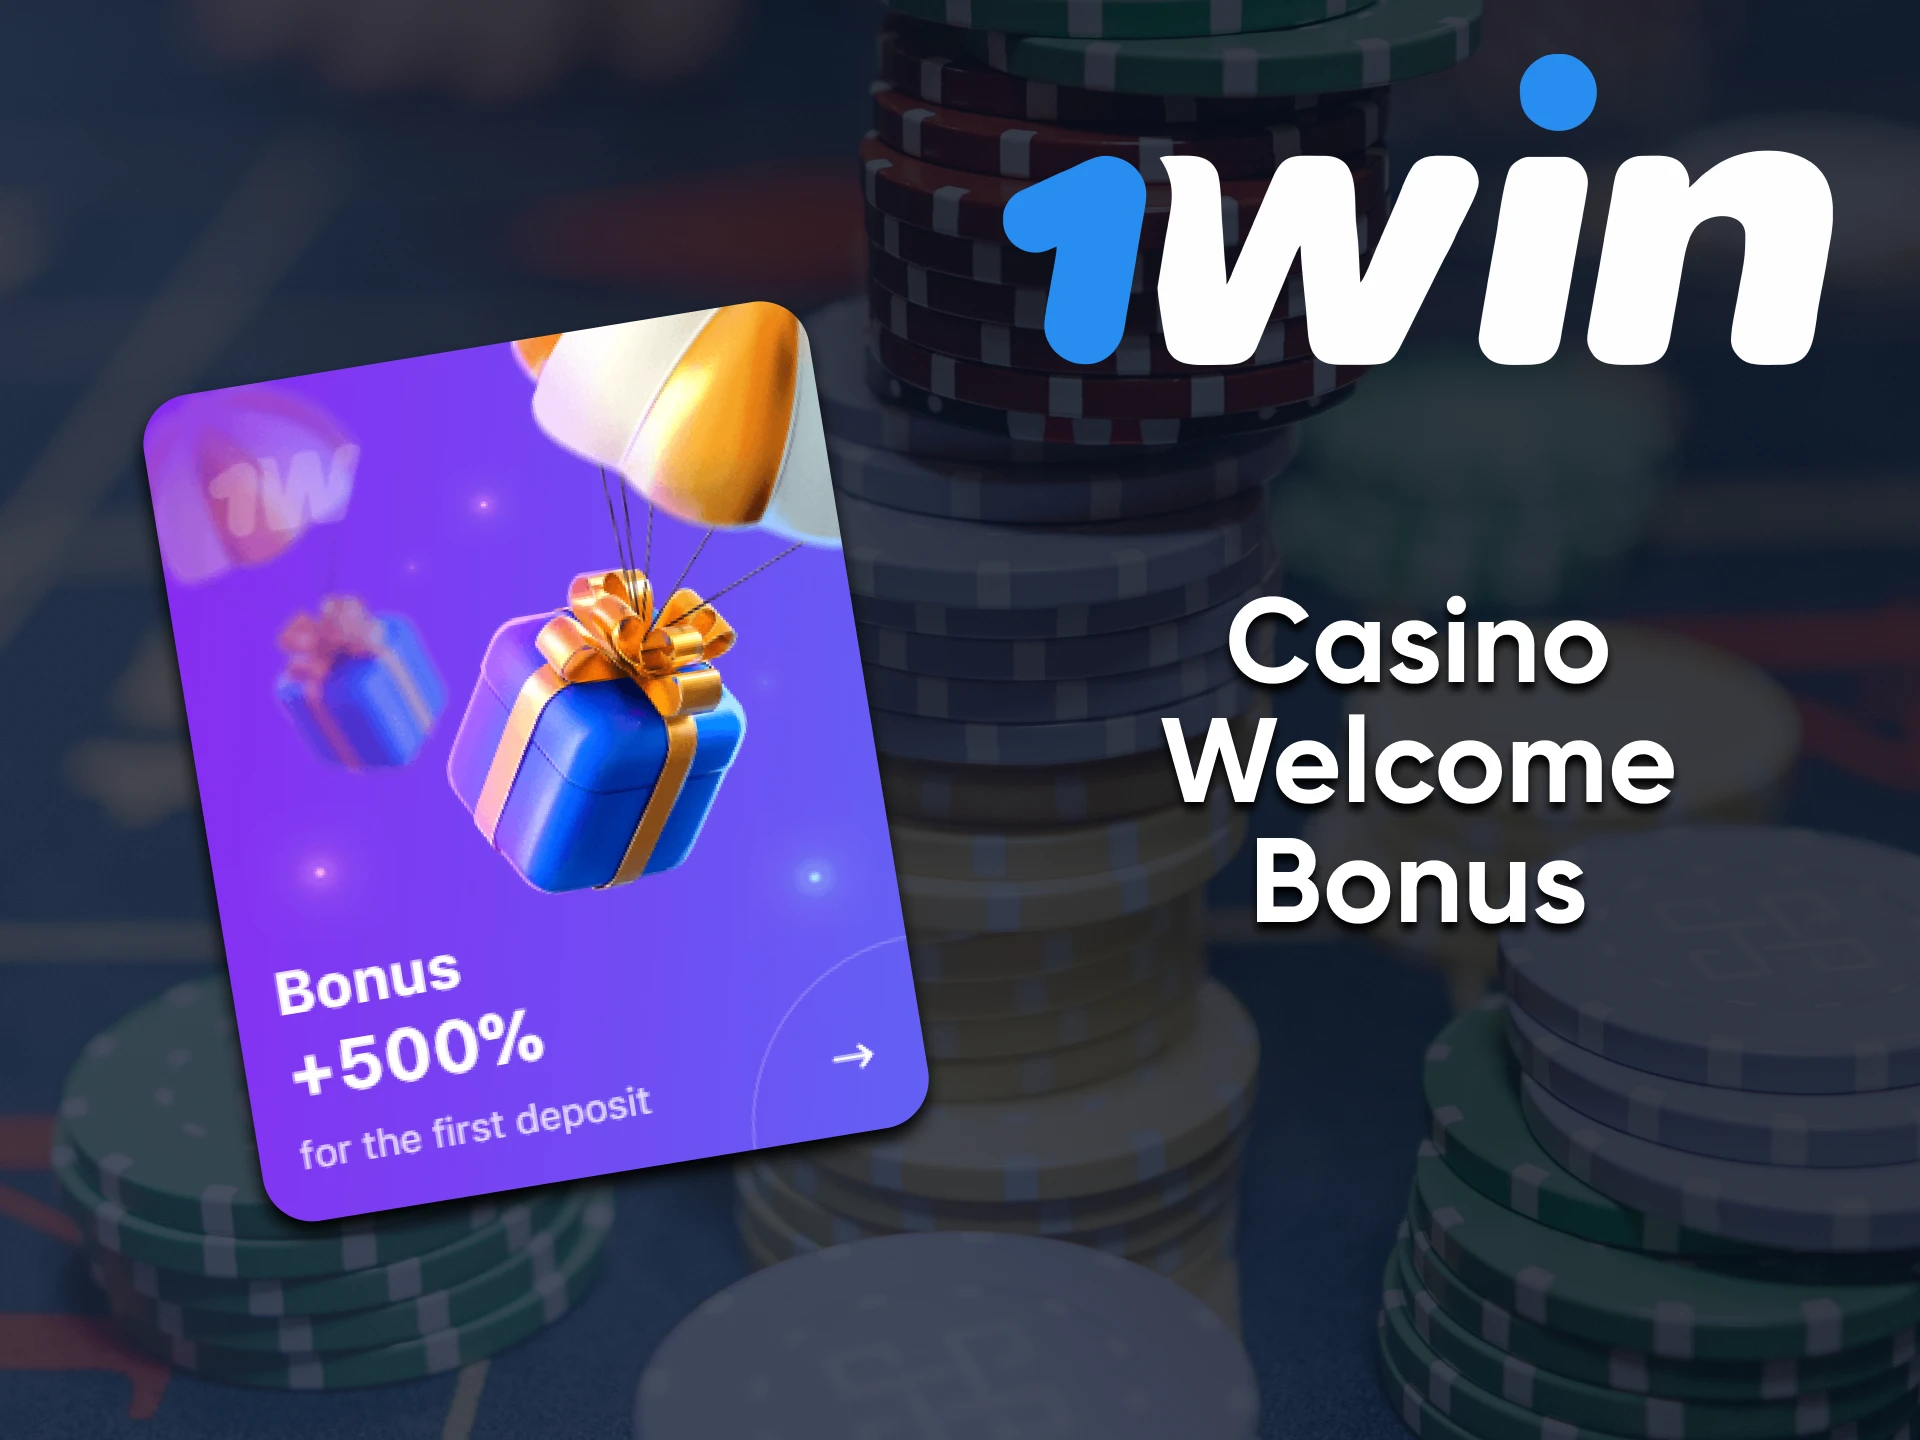 To get a bonus for playing at 1win casino. replenish funds.